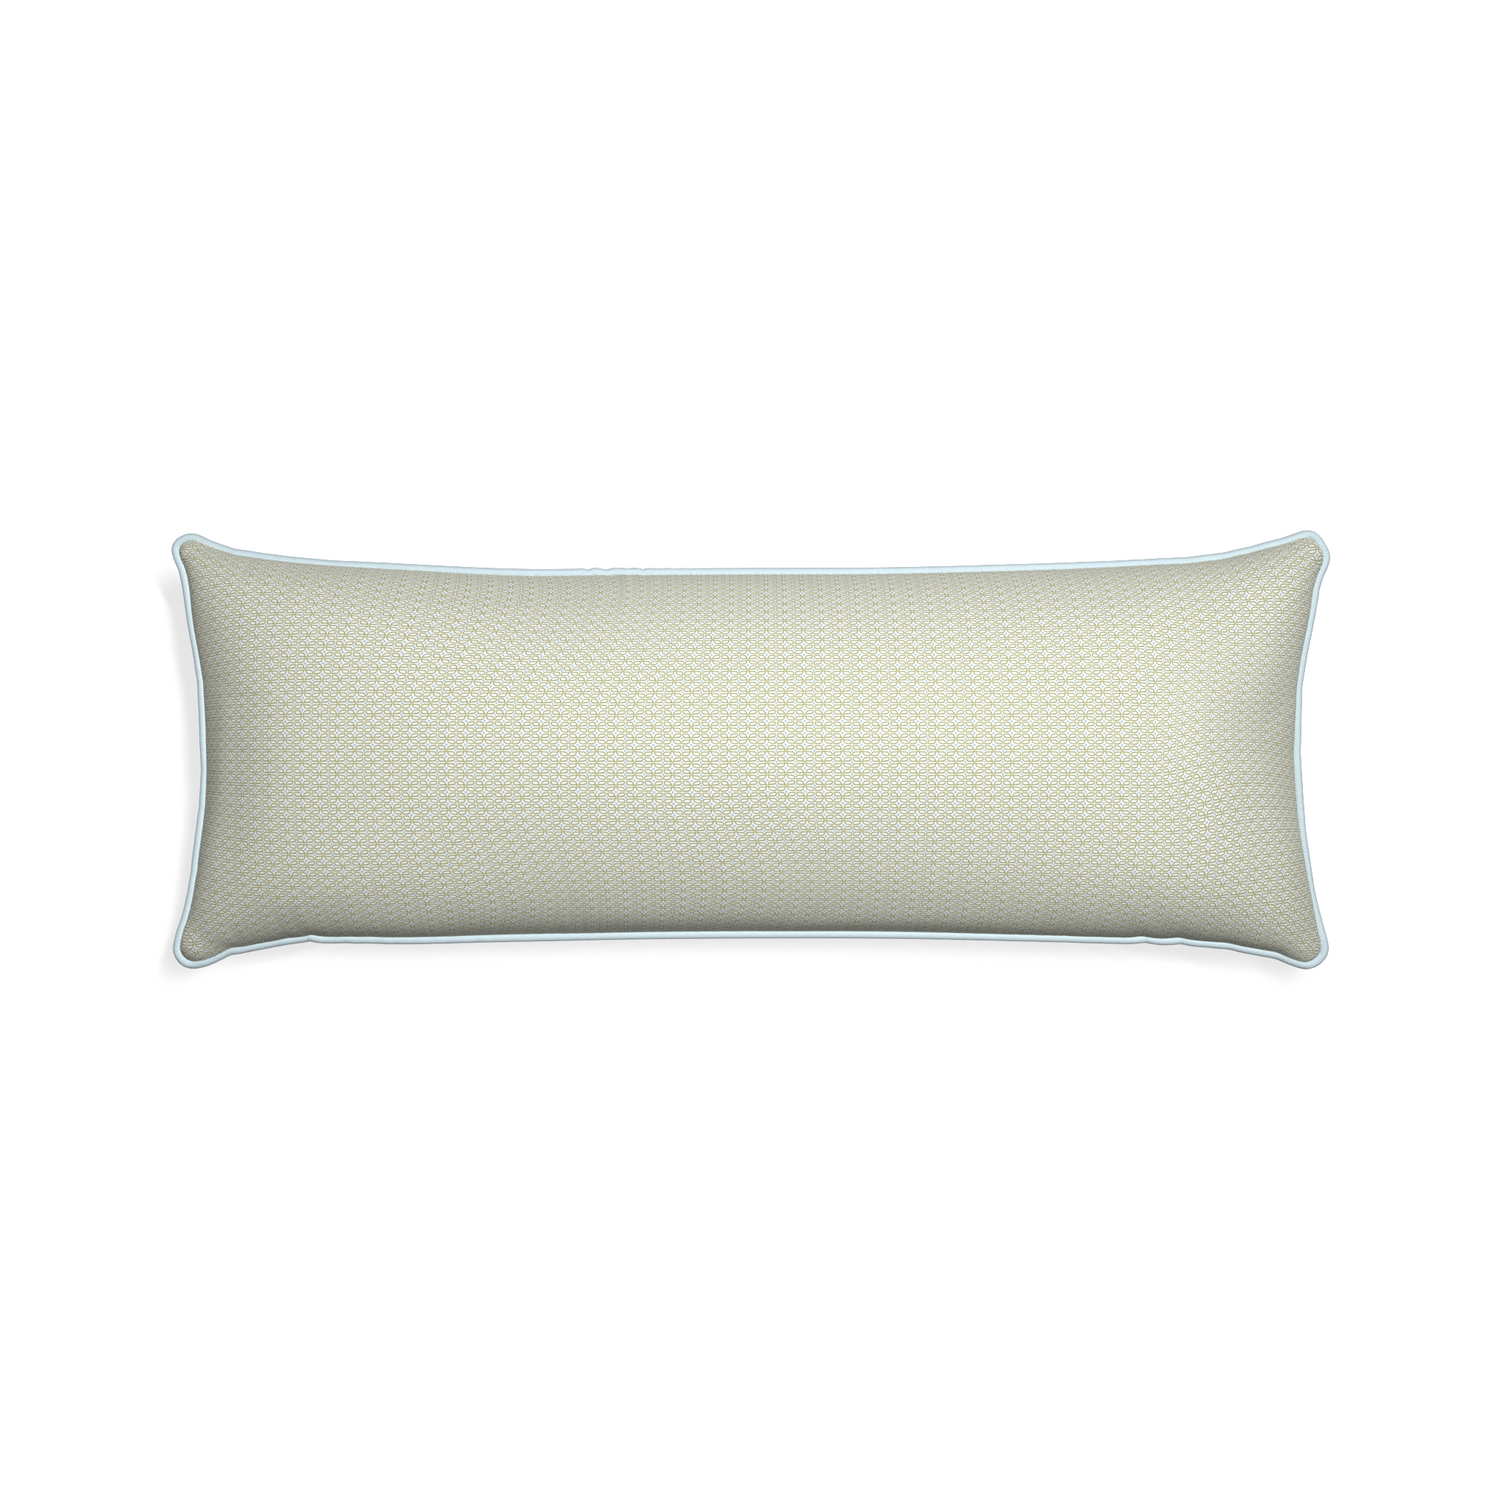 Xl-lumbar loomi moss custom moss green geometricpillow with powder piping on white background